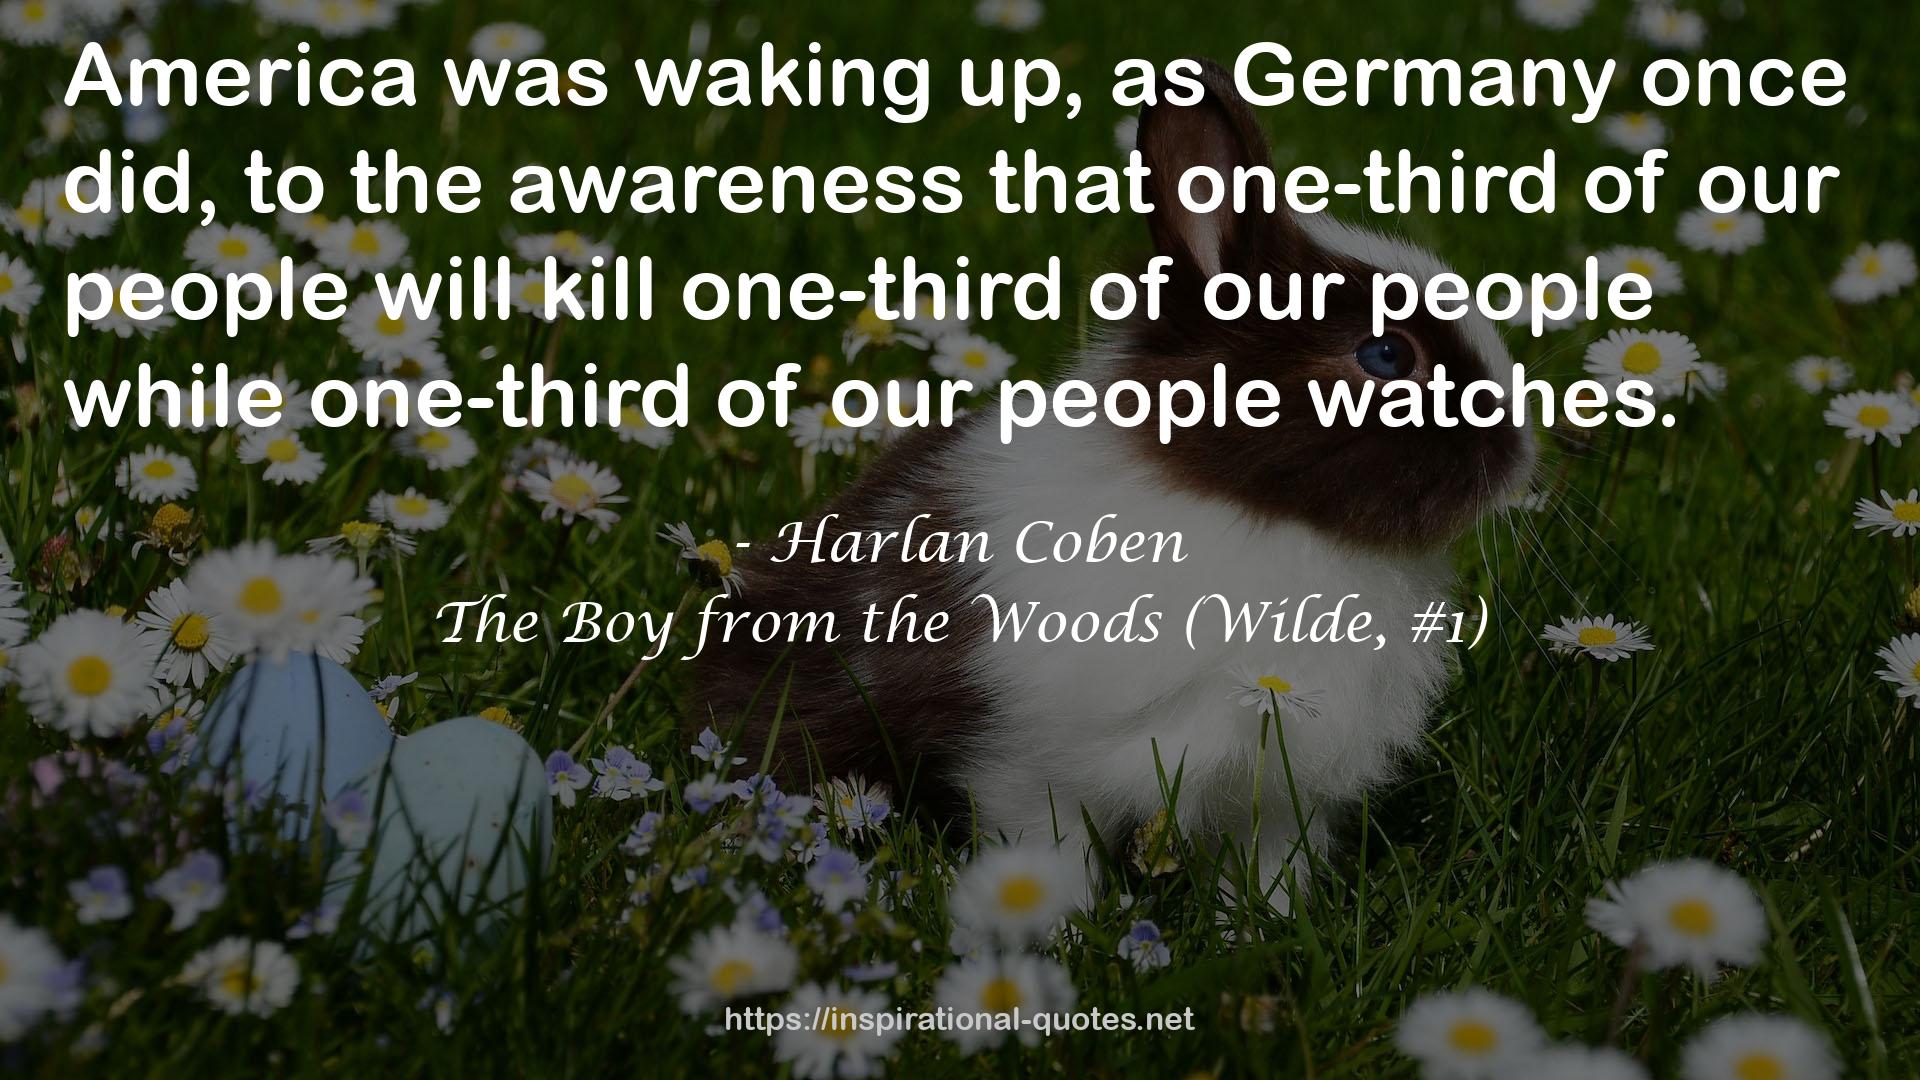 The Boy from the Woods (Wilde, #1) QUOTES